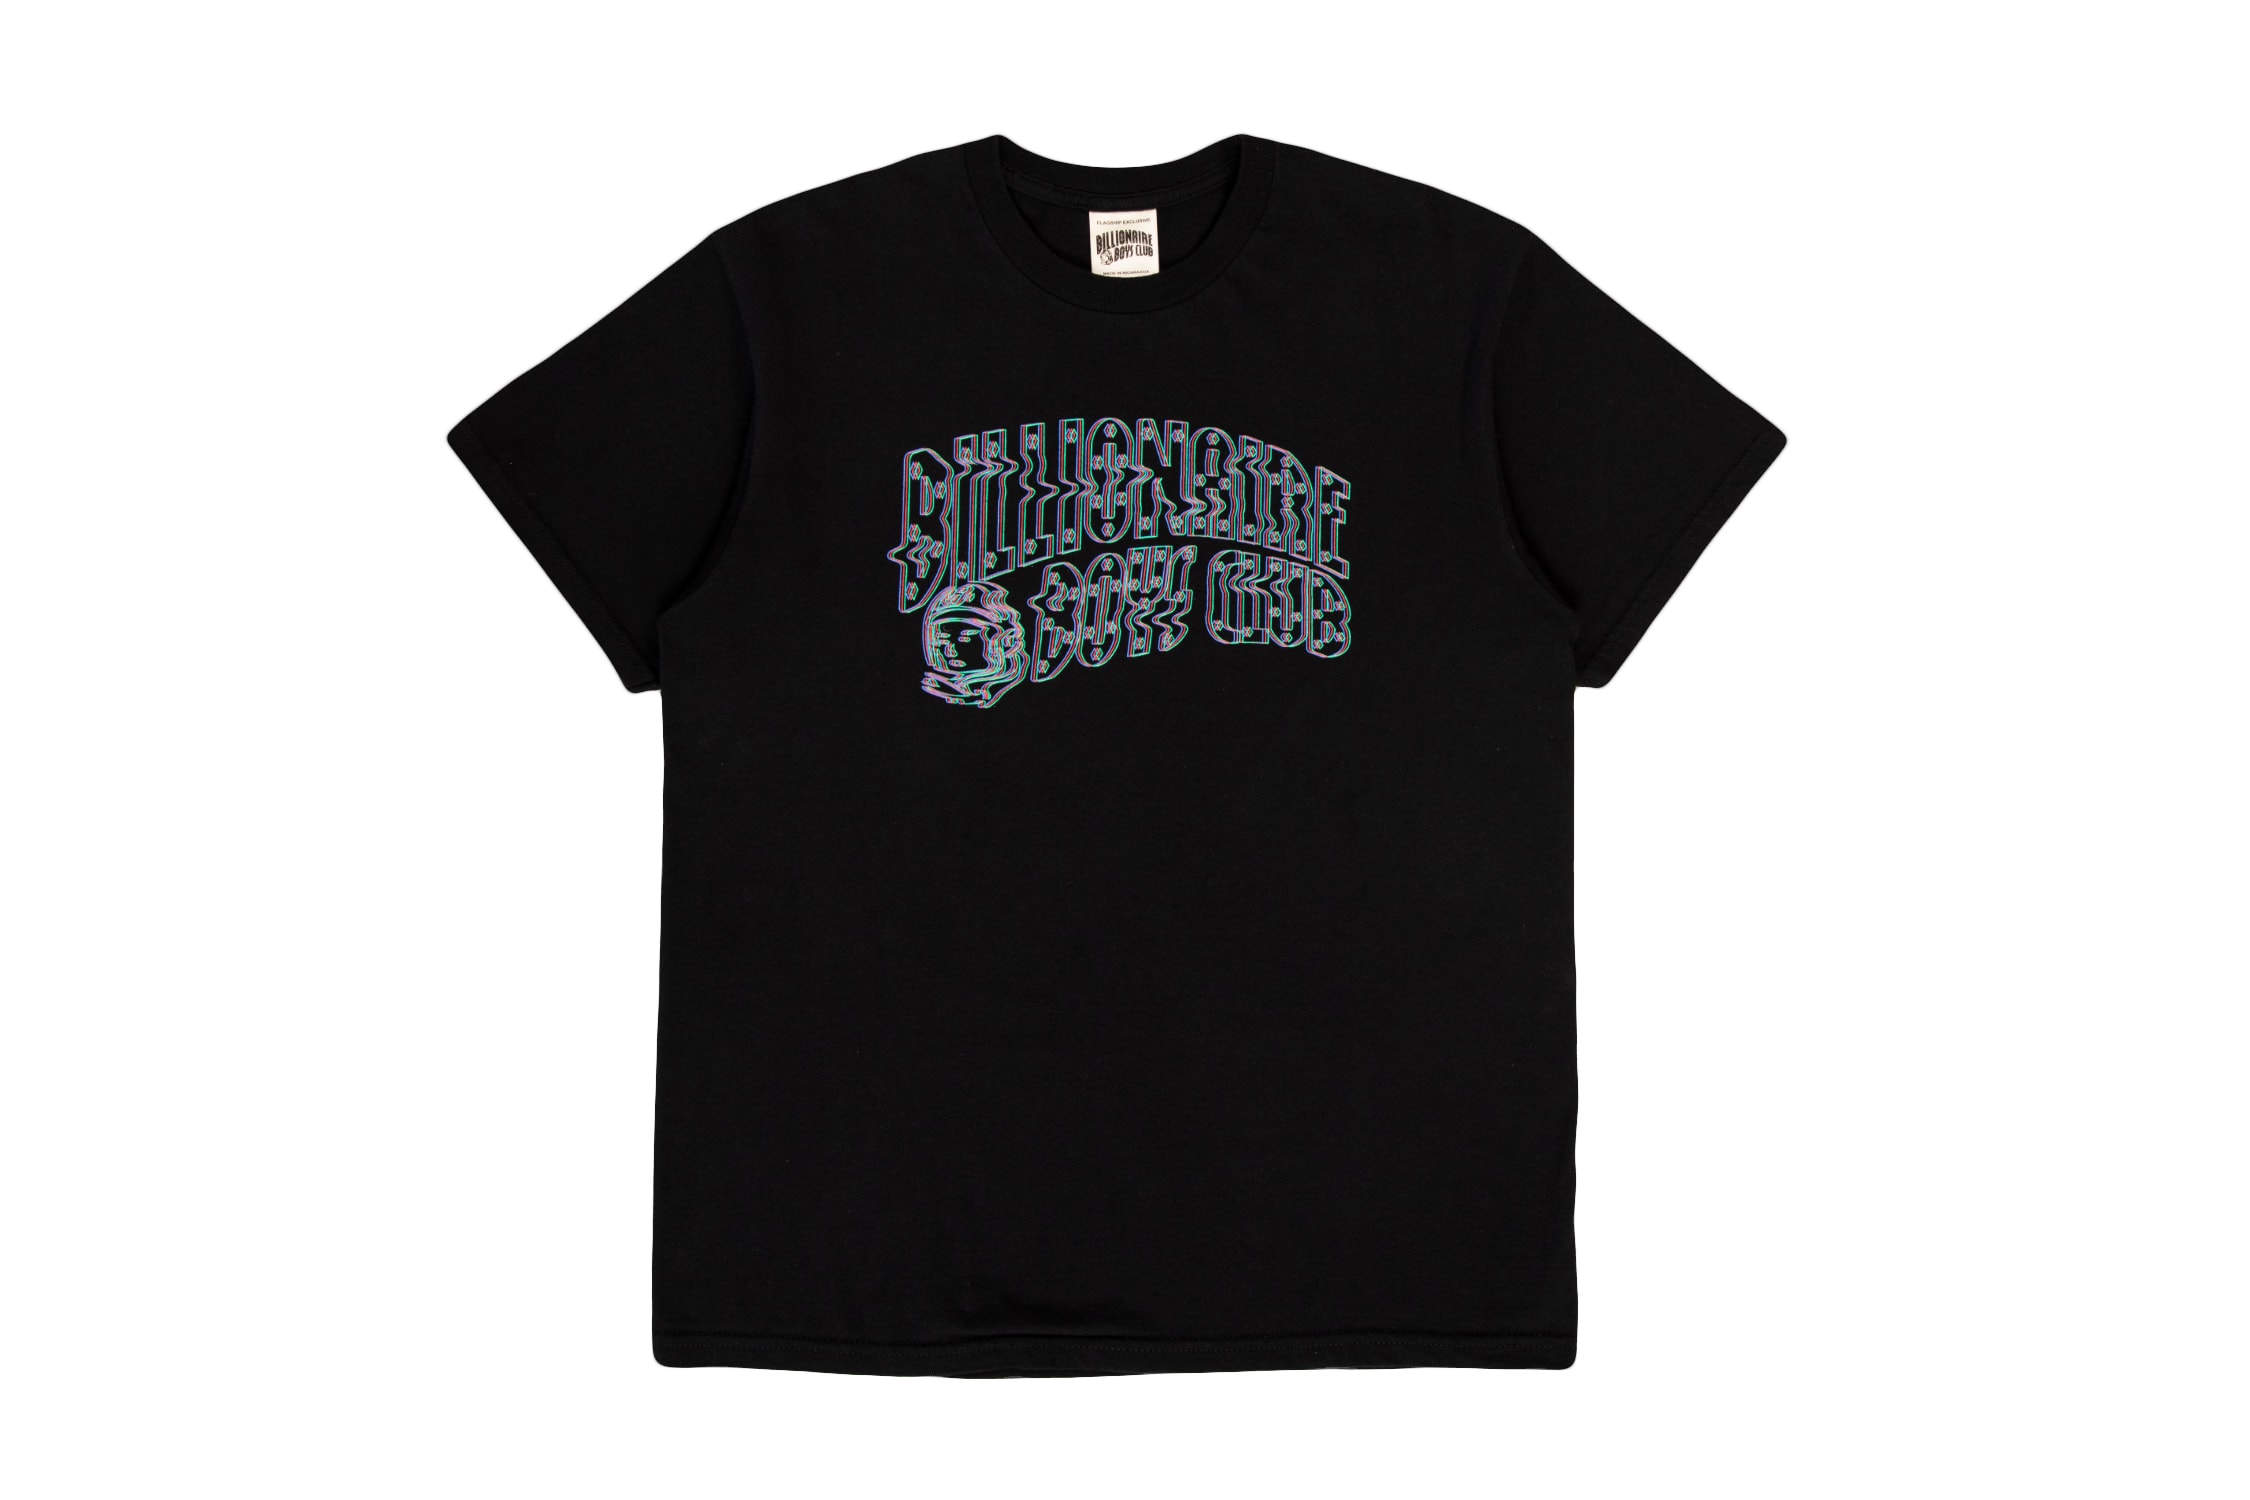 Billionaire Boys Club Call of Duty League Collab Capsule Collection Apparel Limited Edition Modern Warfare Black Ops WWII